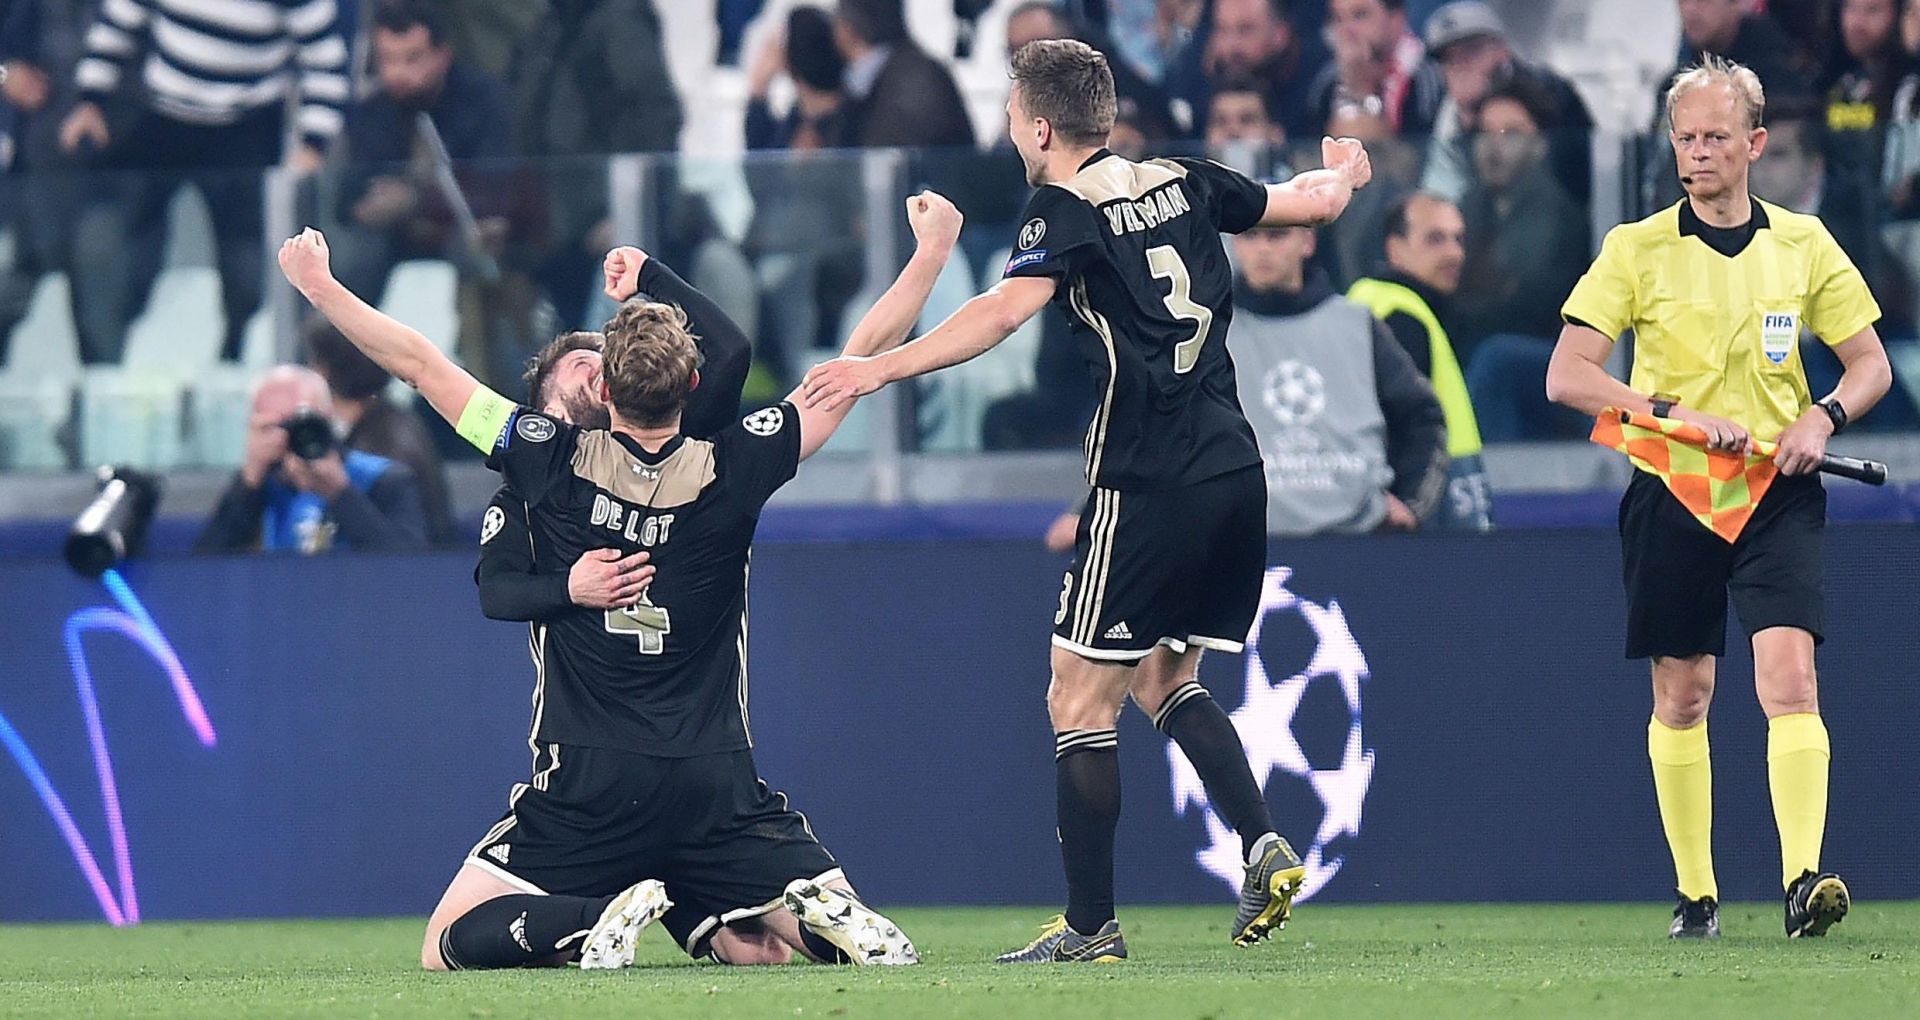 epa07511635 Ajax players celebrate at the end of the UEFA Champions League quarter final, second leg, soccer match between Juventus FC and Ajax Amsterdam in Turin, Italy, 16 April 2019. Ajax won 2-1 and advanced to the semi finals.  EPA/ALESSANDRO DI MARCO